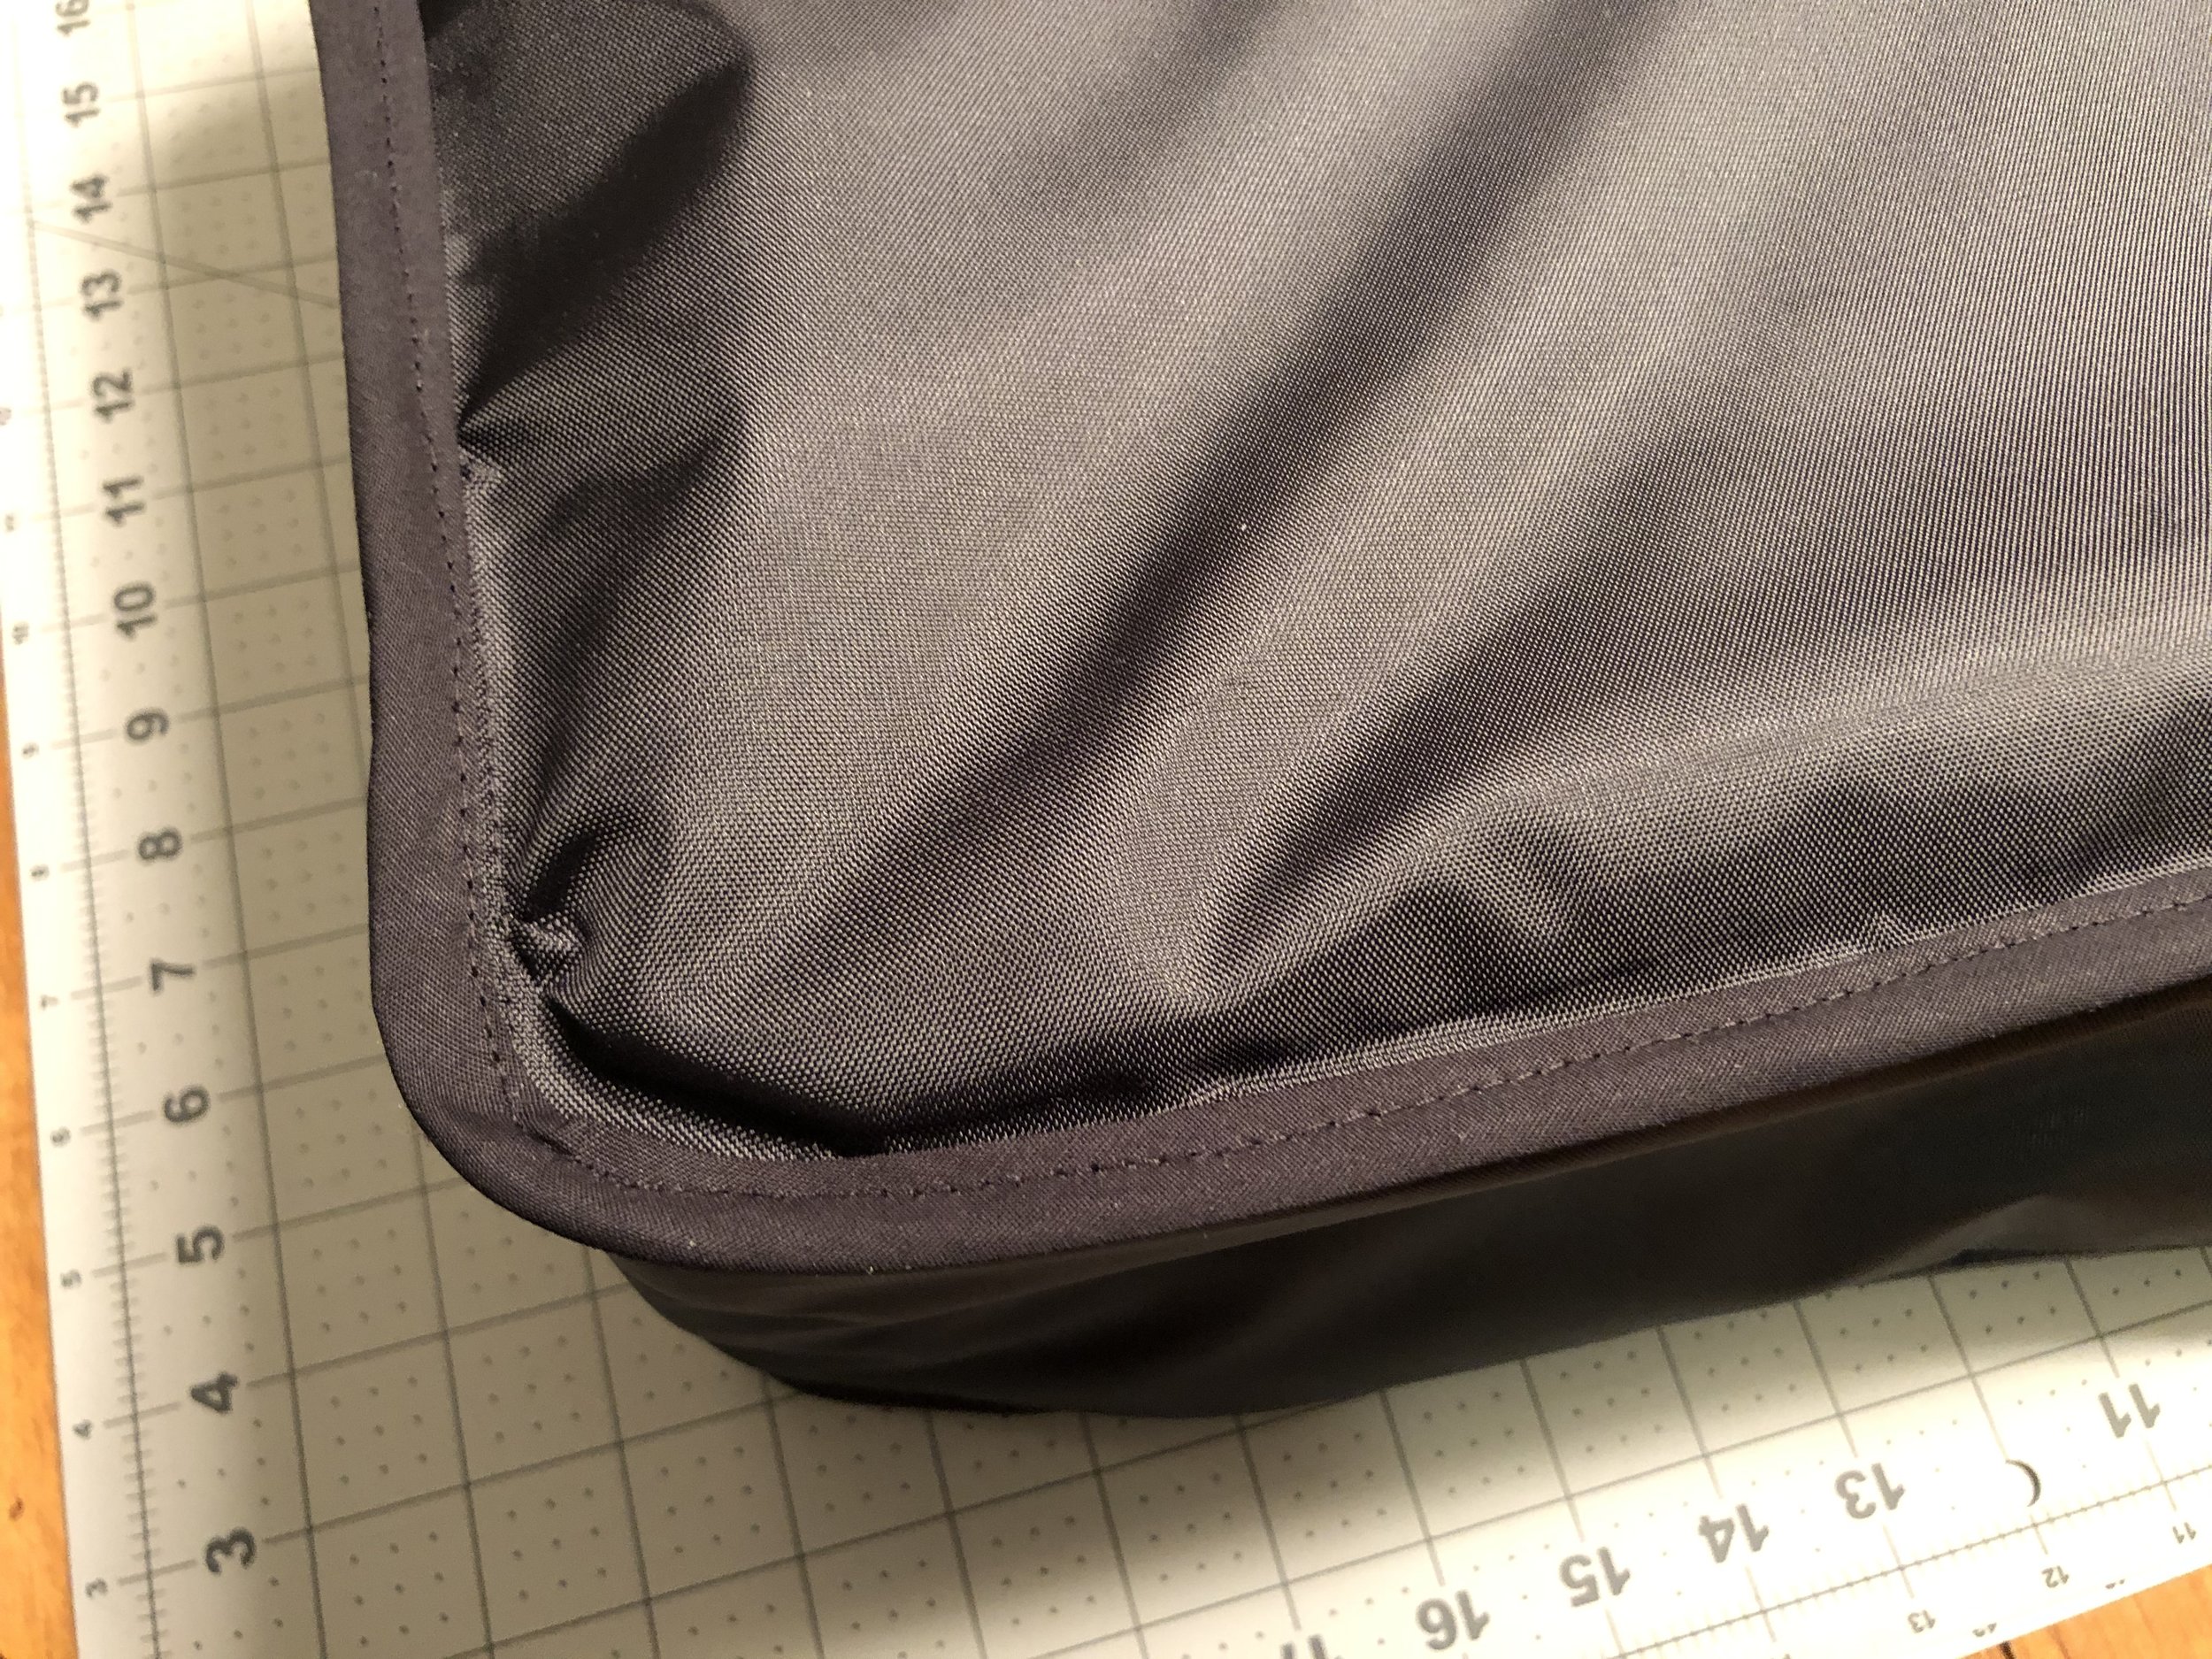  After sewing, bind the seam with 1/2” bias tape. 